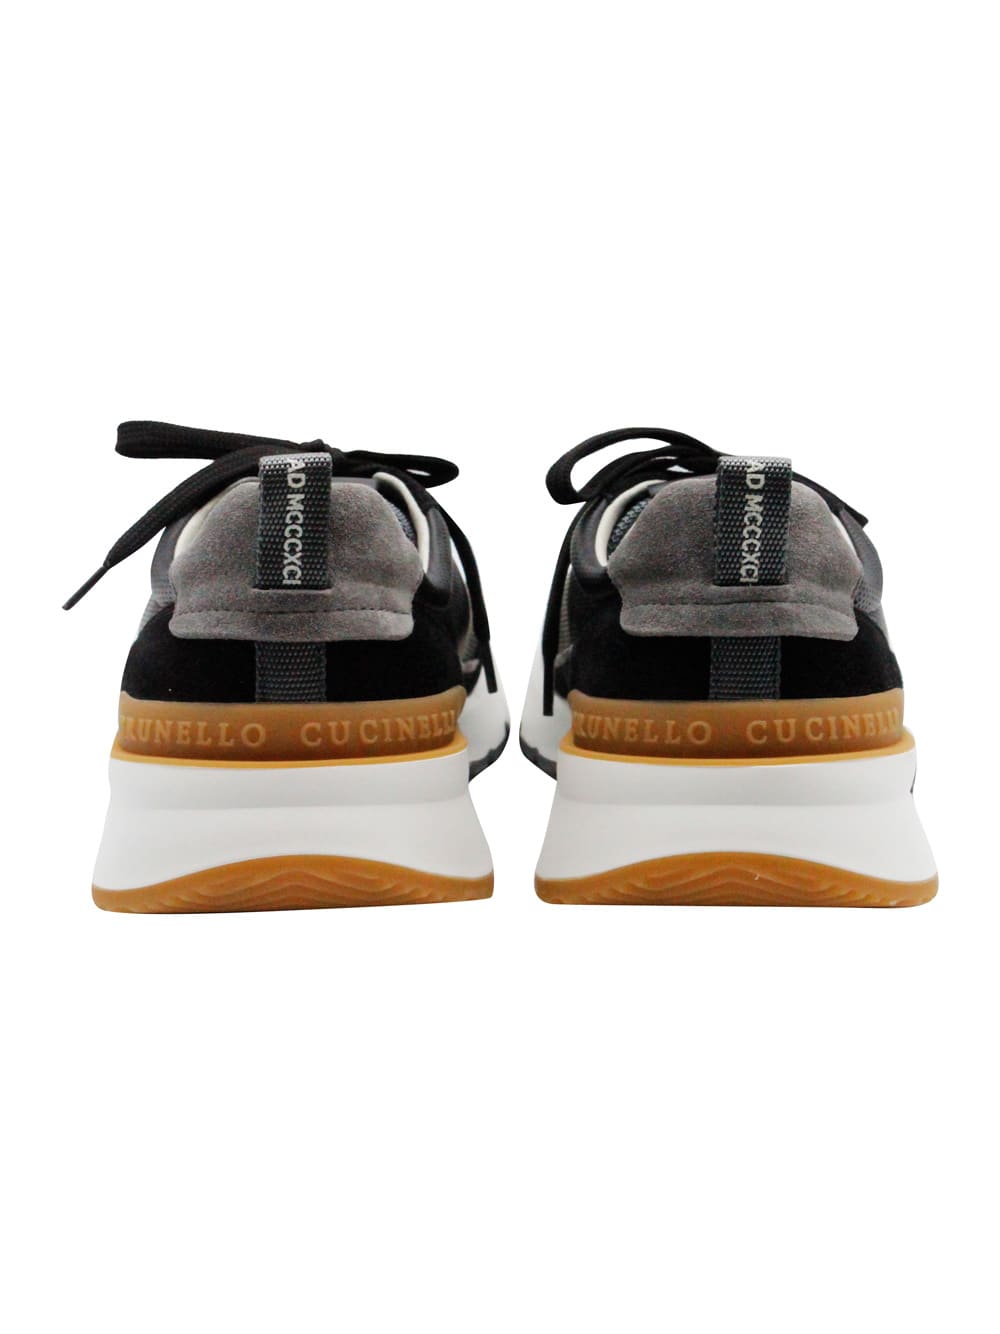 Shop Brunello Cucinelli Sneaker Made Of Soft Leather With Suede Finishes And Contrasting Color Details, Micron Sole In Black